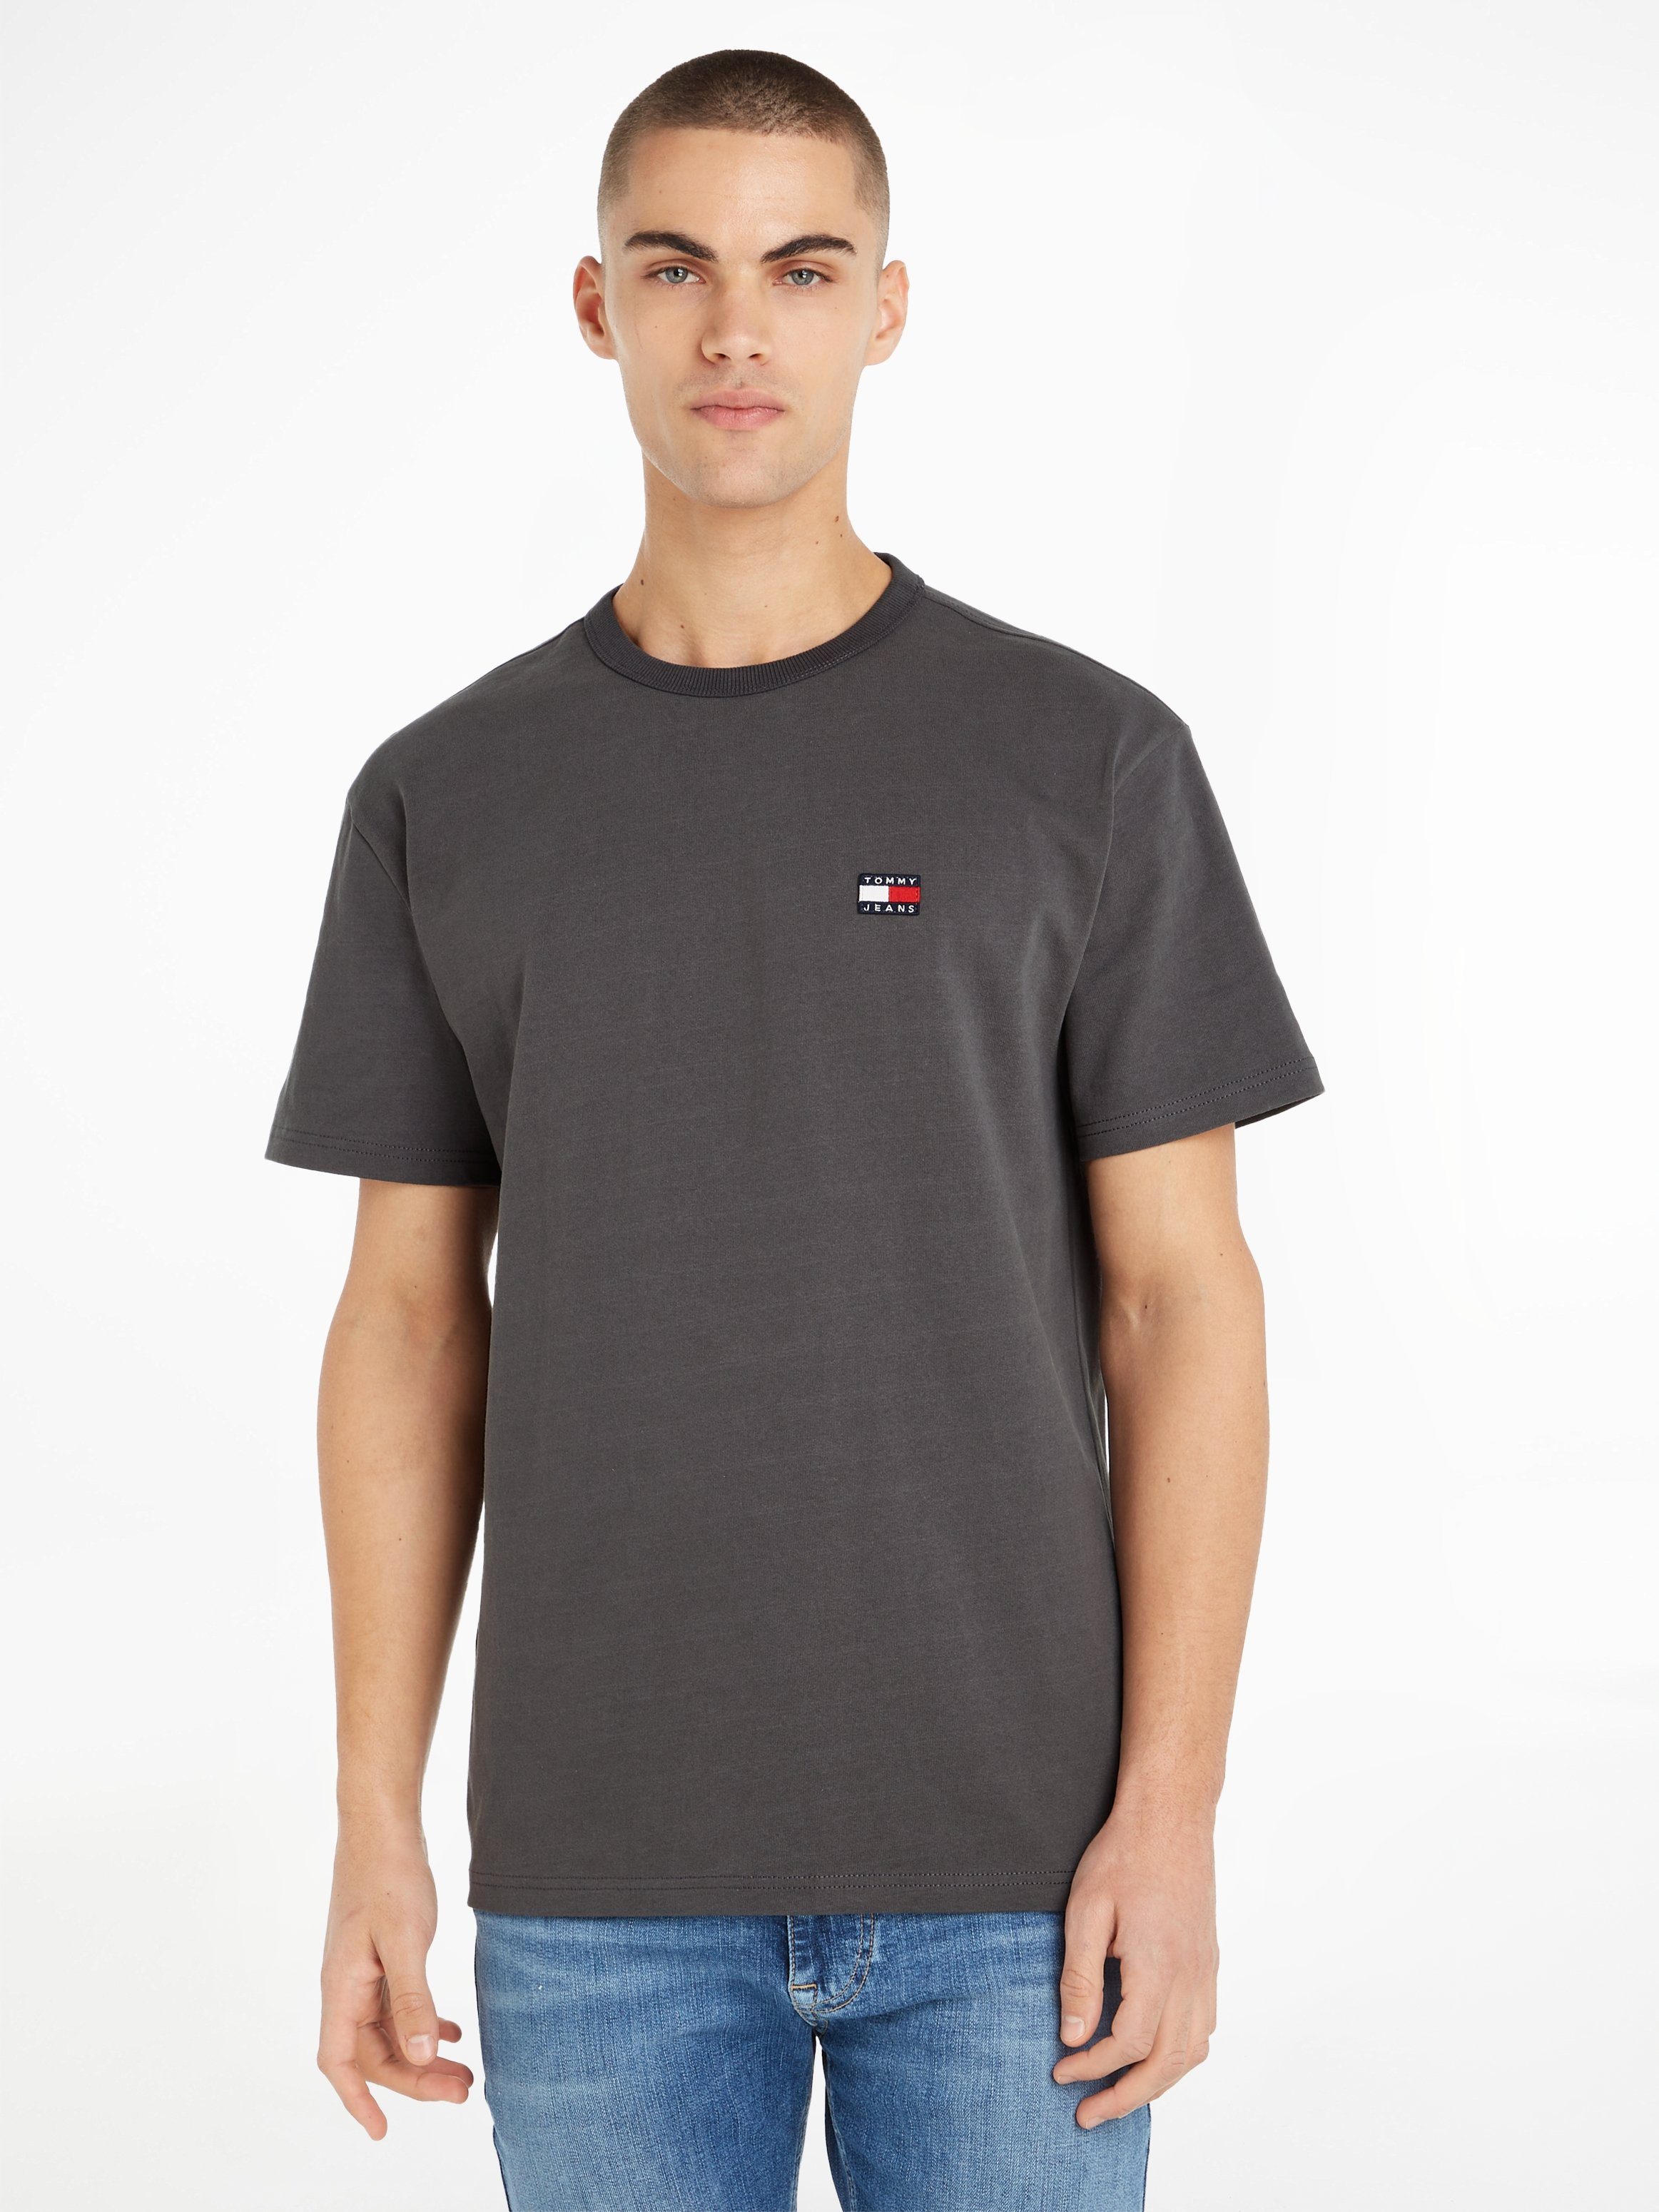 Tommy Jeans T-Shirt TJM Charcoal TEE CLSC New TOMMY XS BADGE